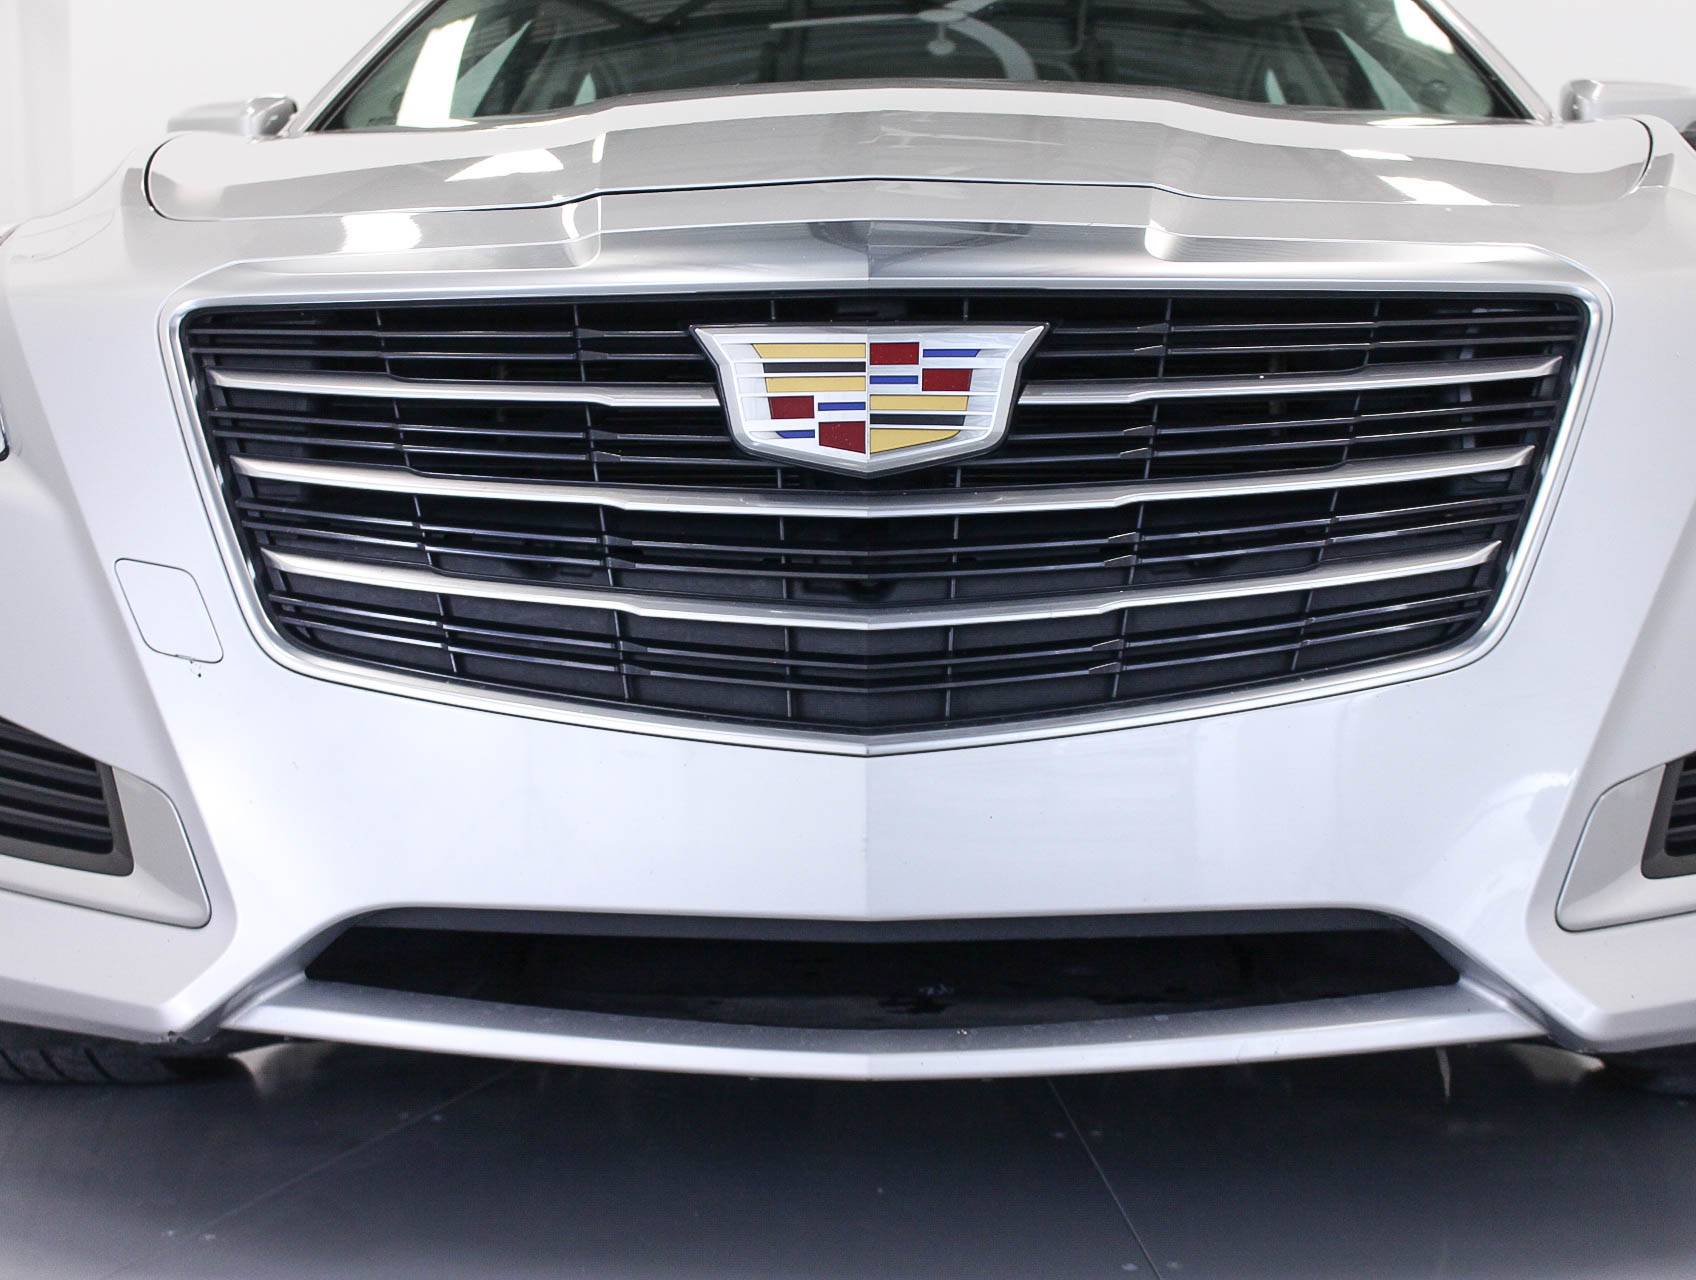 Florida Fine Cars - Used CADILLAC CTS 2015 WEST PALM LUXURY